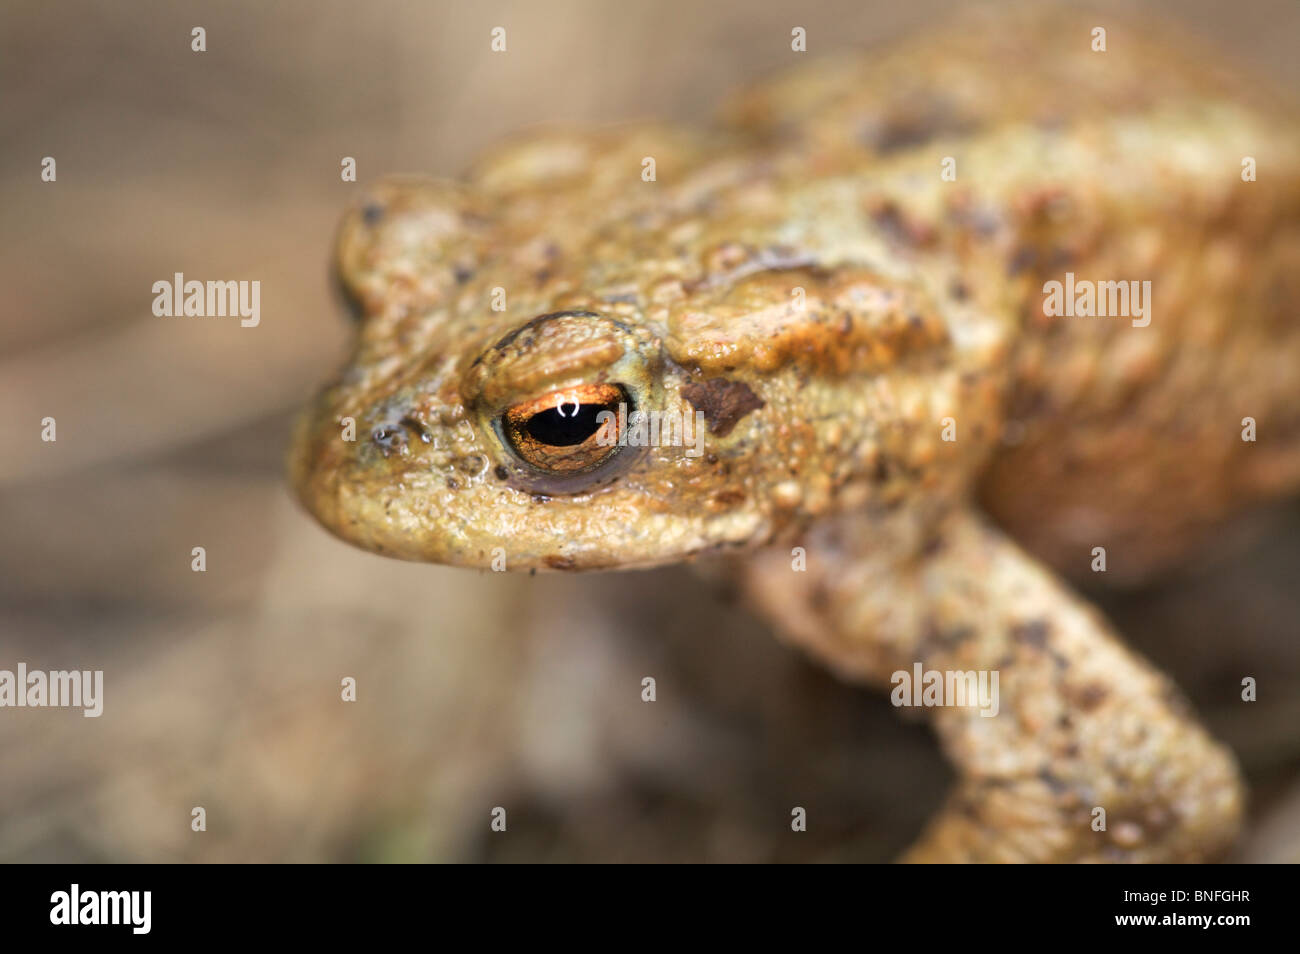 Crapaud commun (Bufo bufo) Banque D'Images